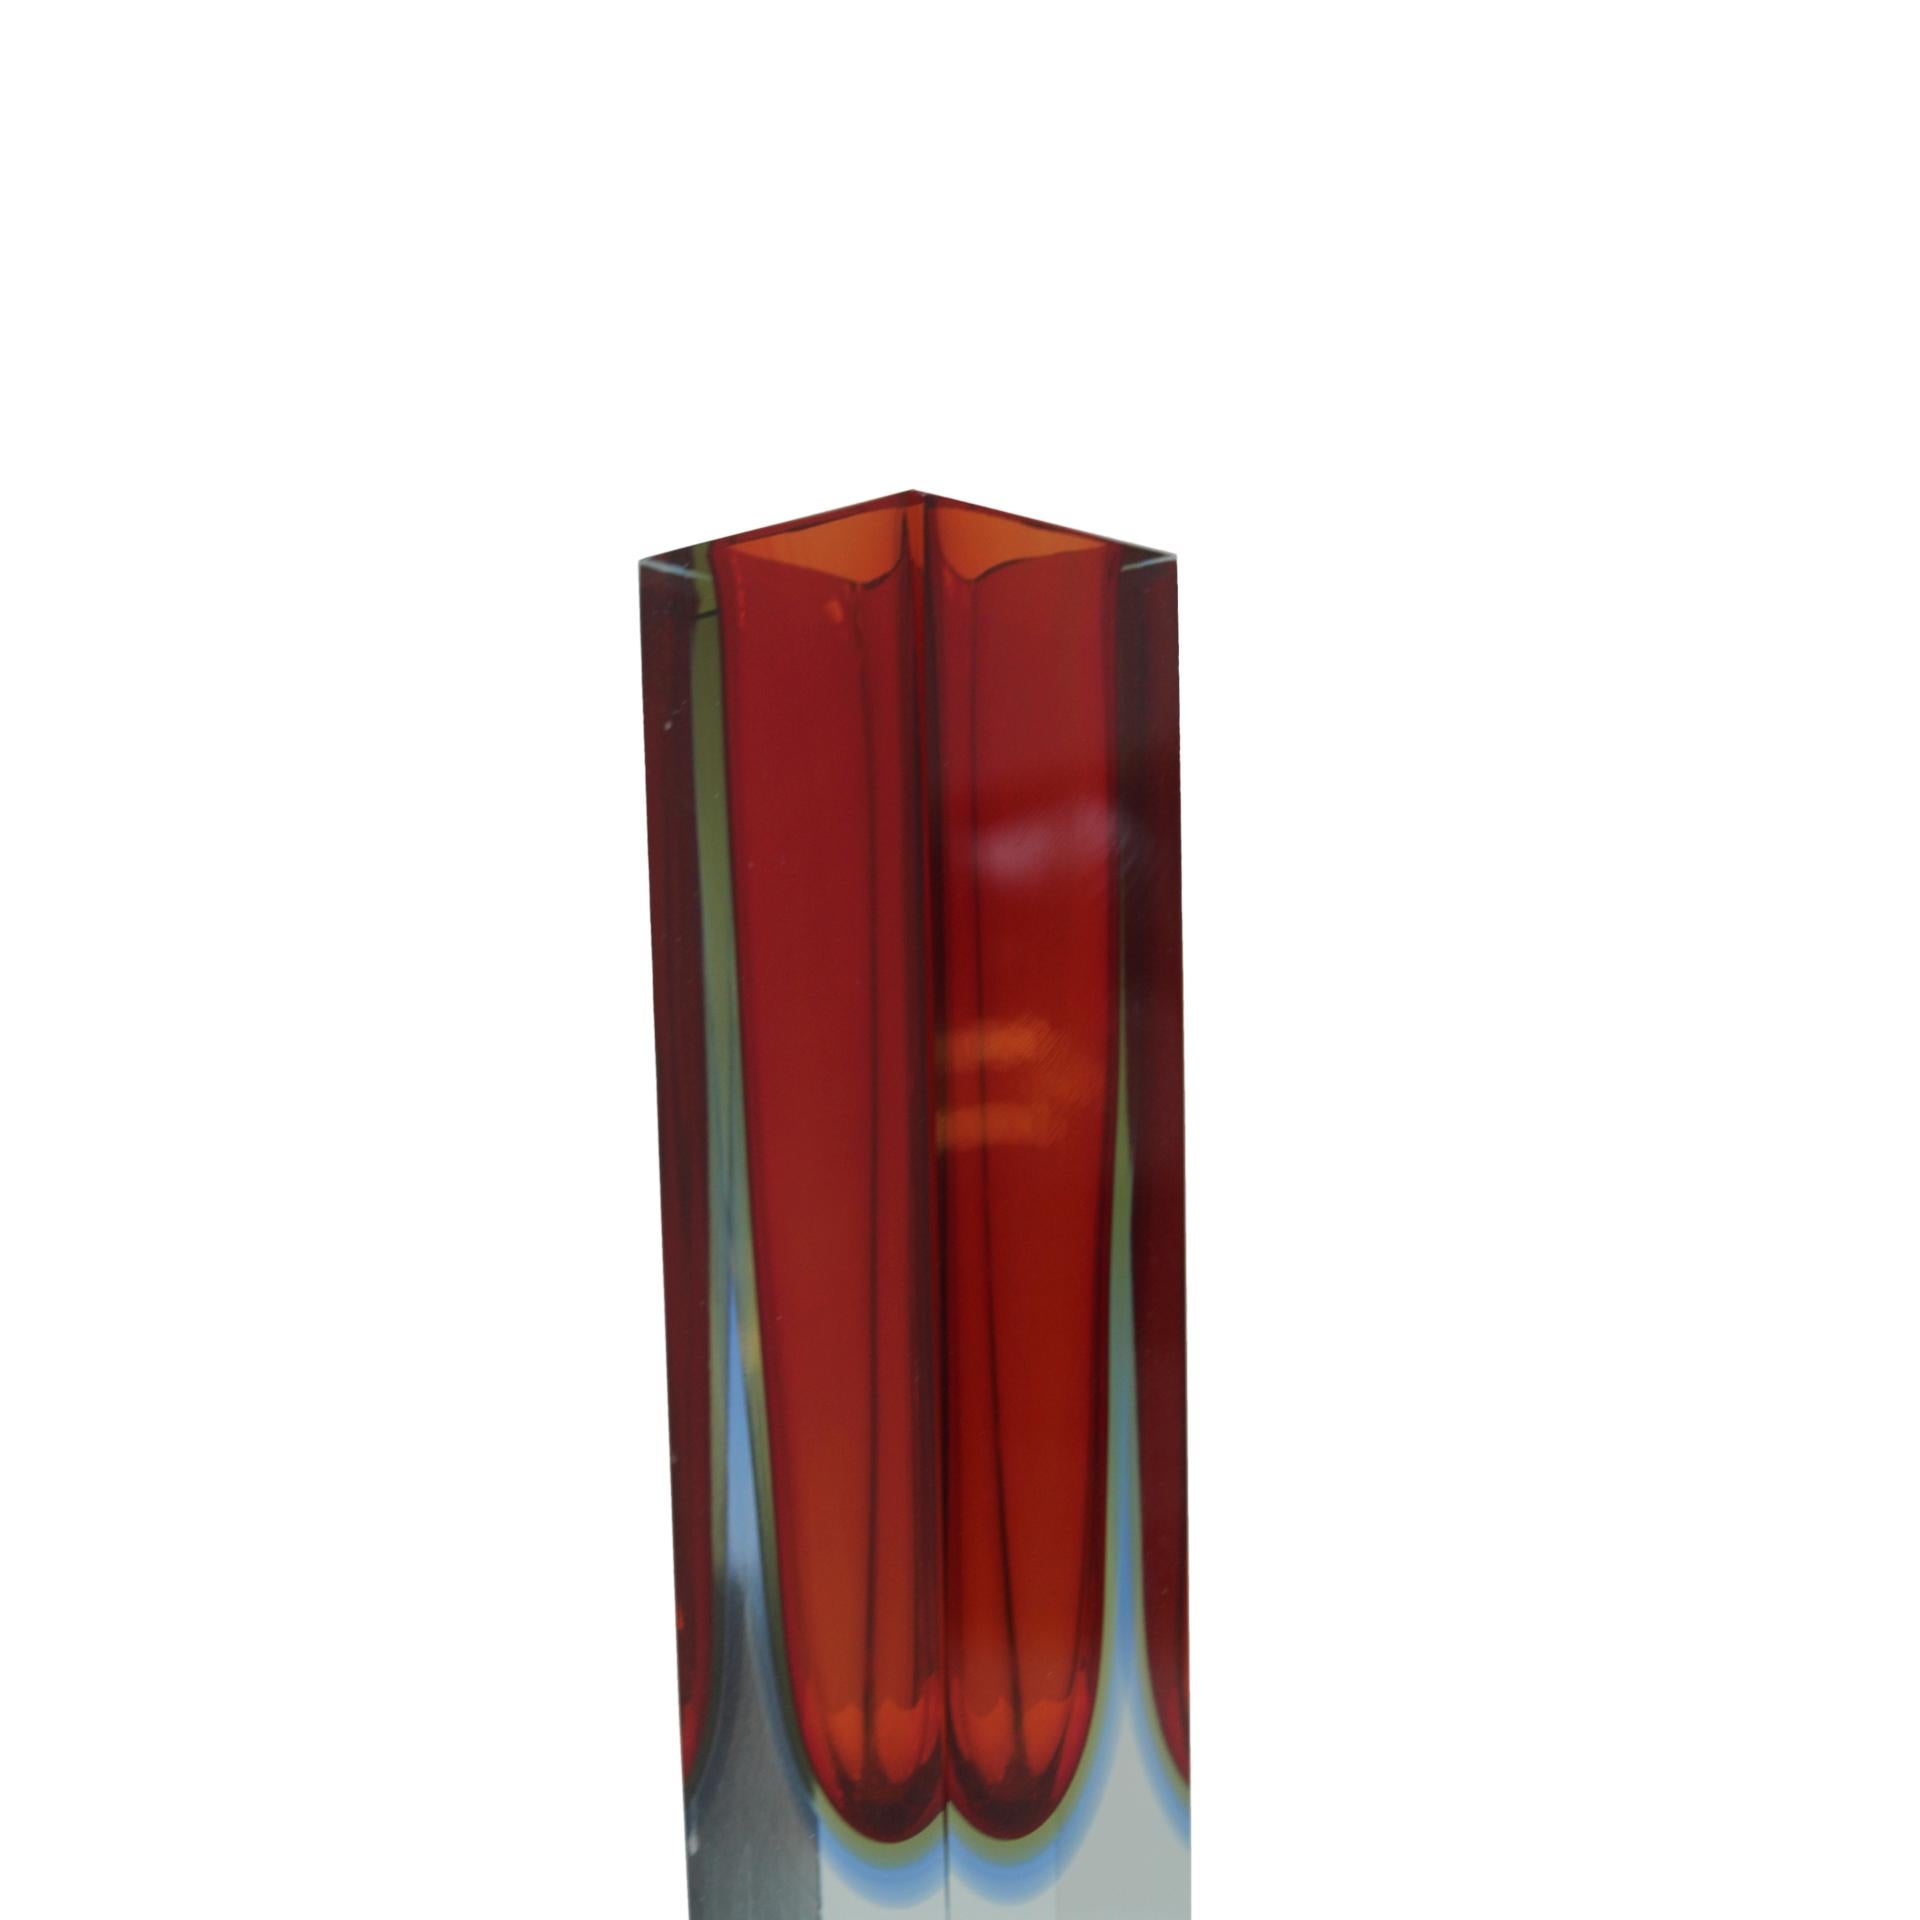 20th Century Mid-Century Modern Red and Blue Sommerso Murano Glass Vase by Flavio Poli 1950 For Sale